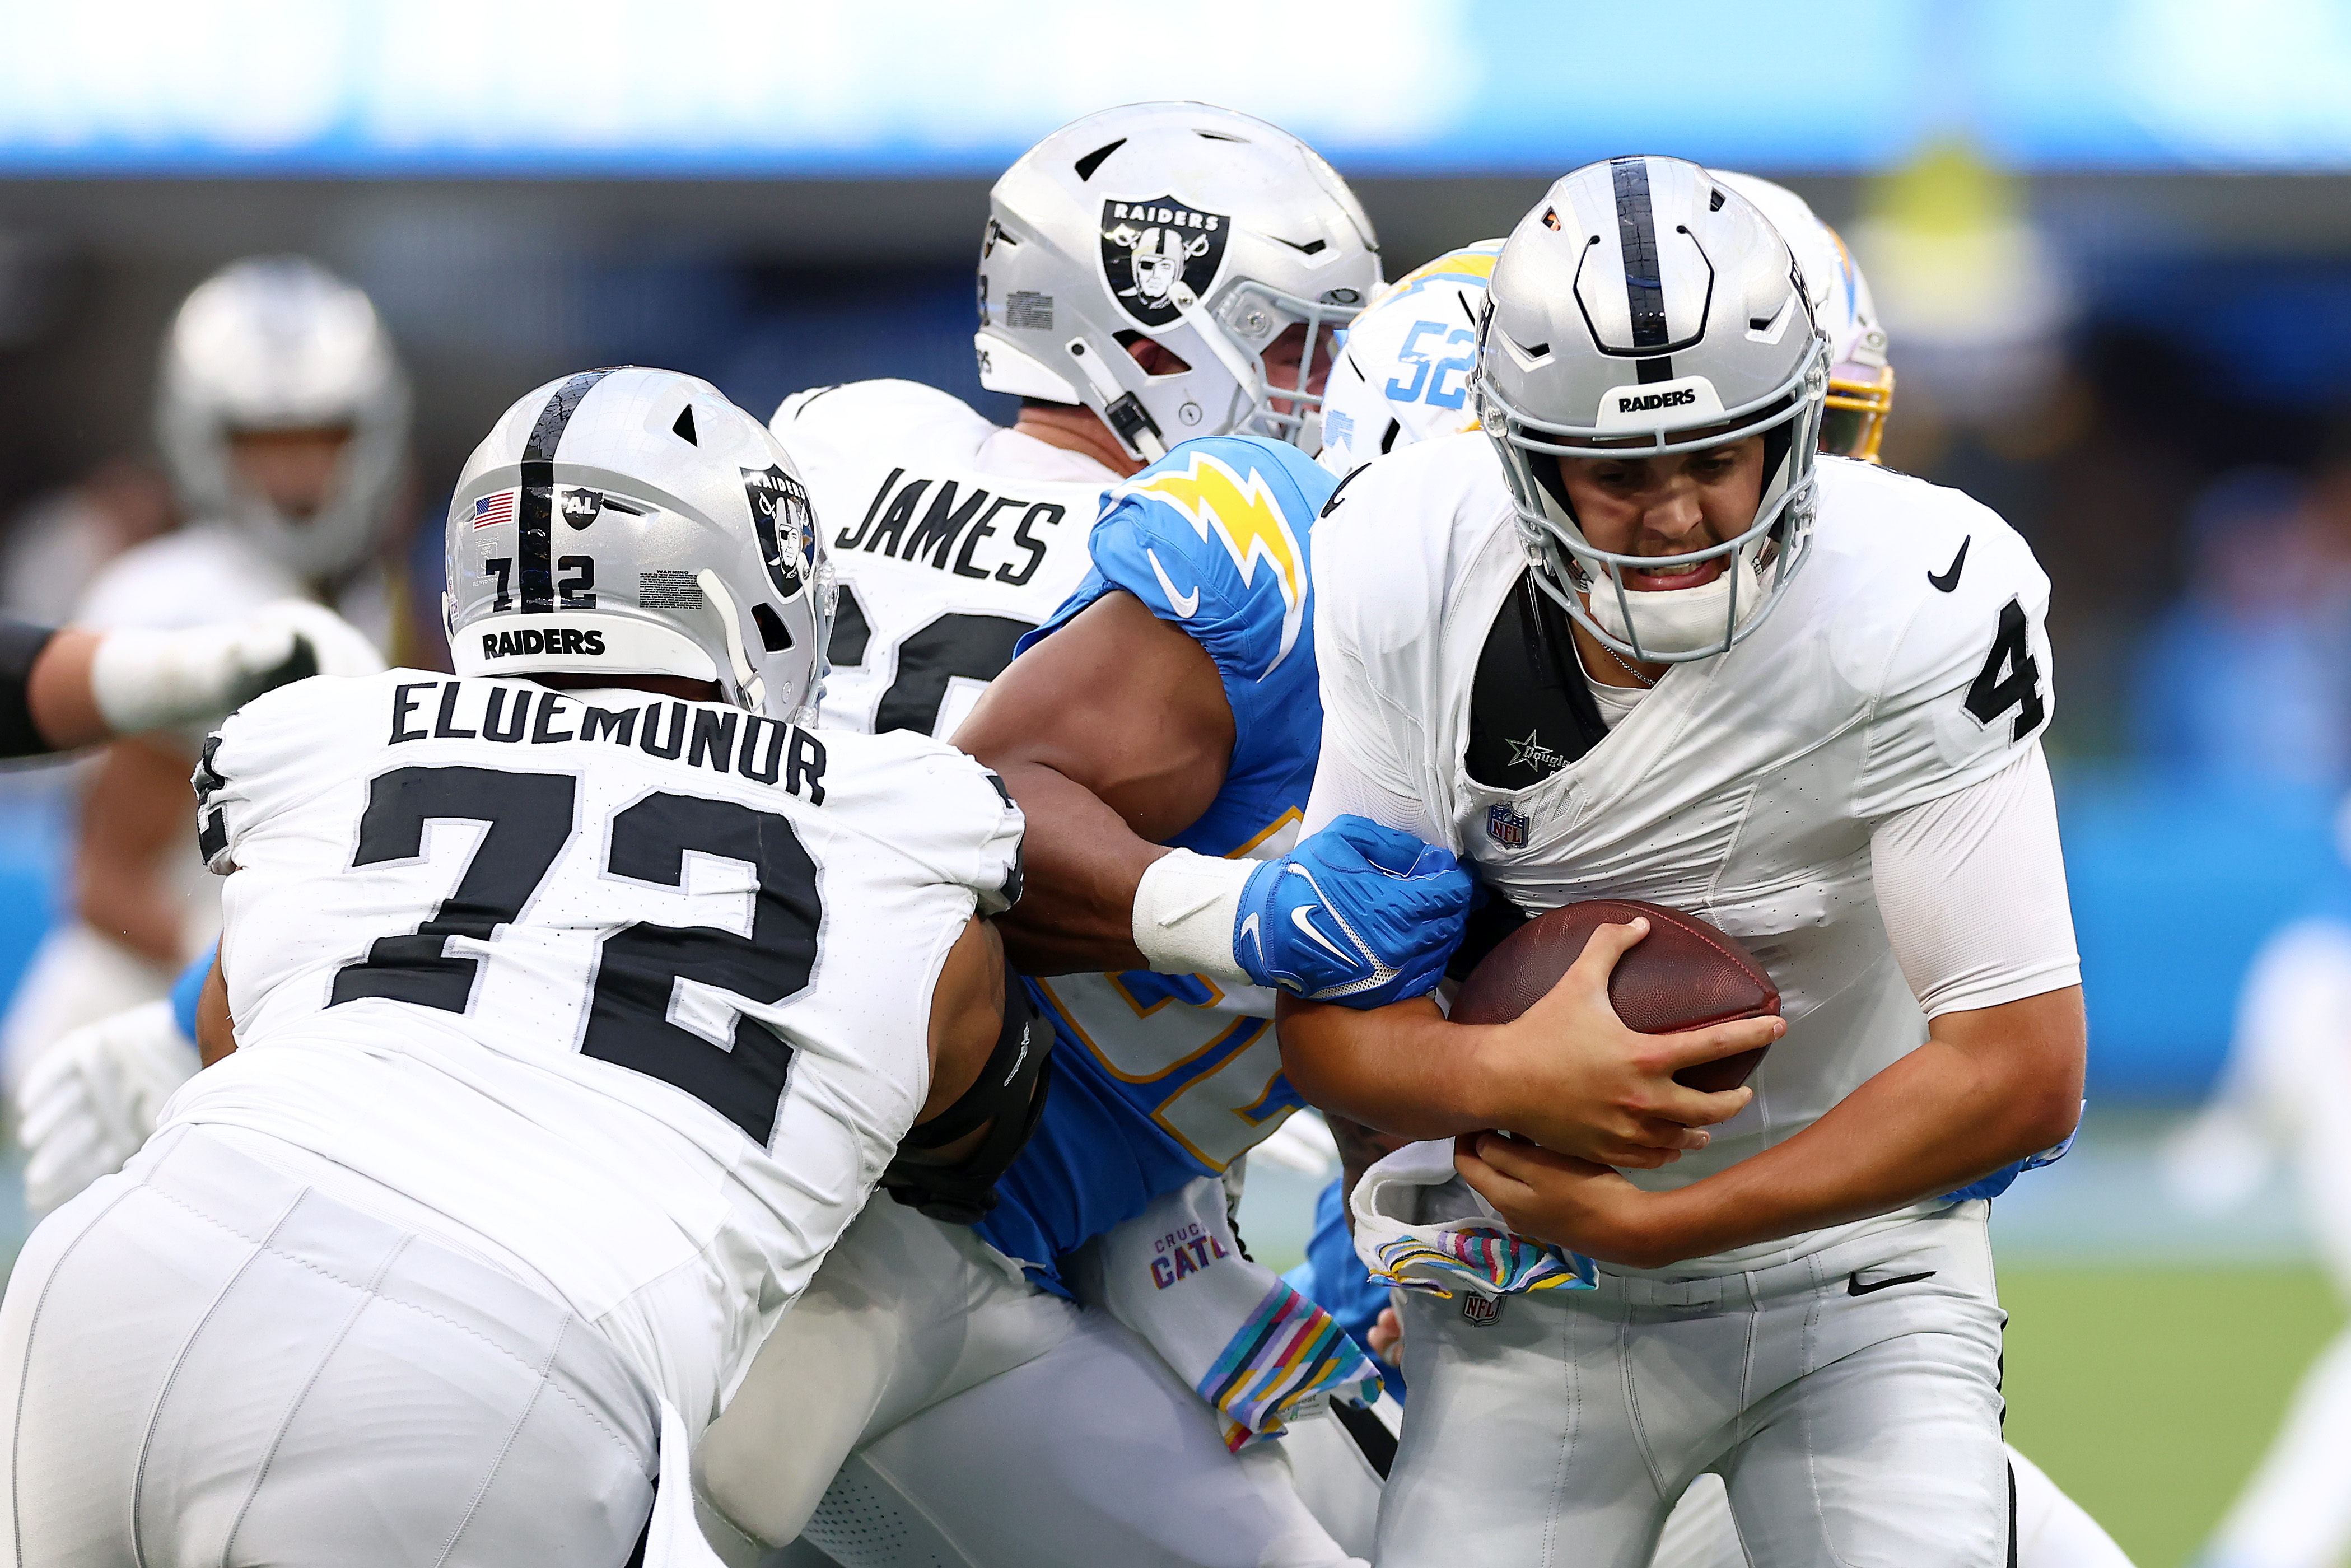 Westwood grad Khalil Mack sets Chargers record with six-sack game